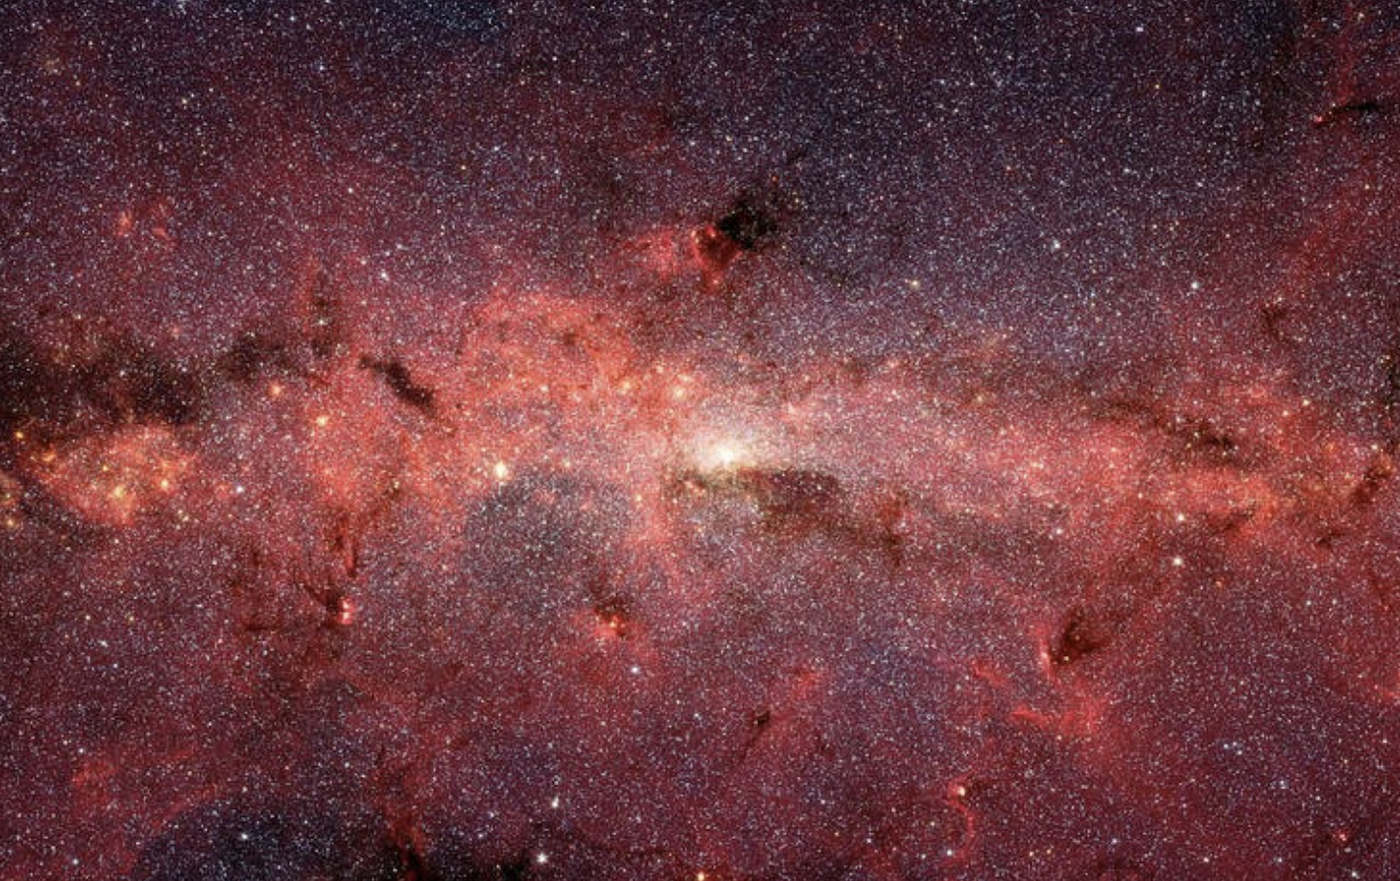 A cosmic scene showing stars and dense clouds of gas in galaxies